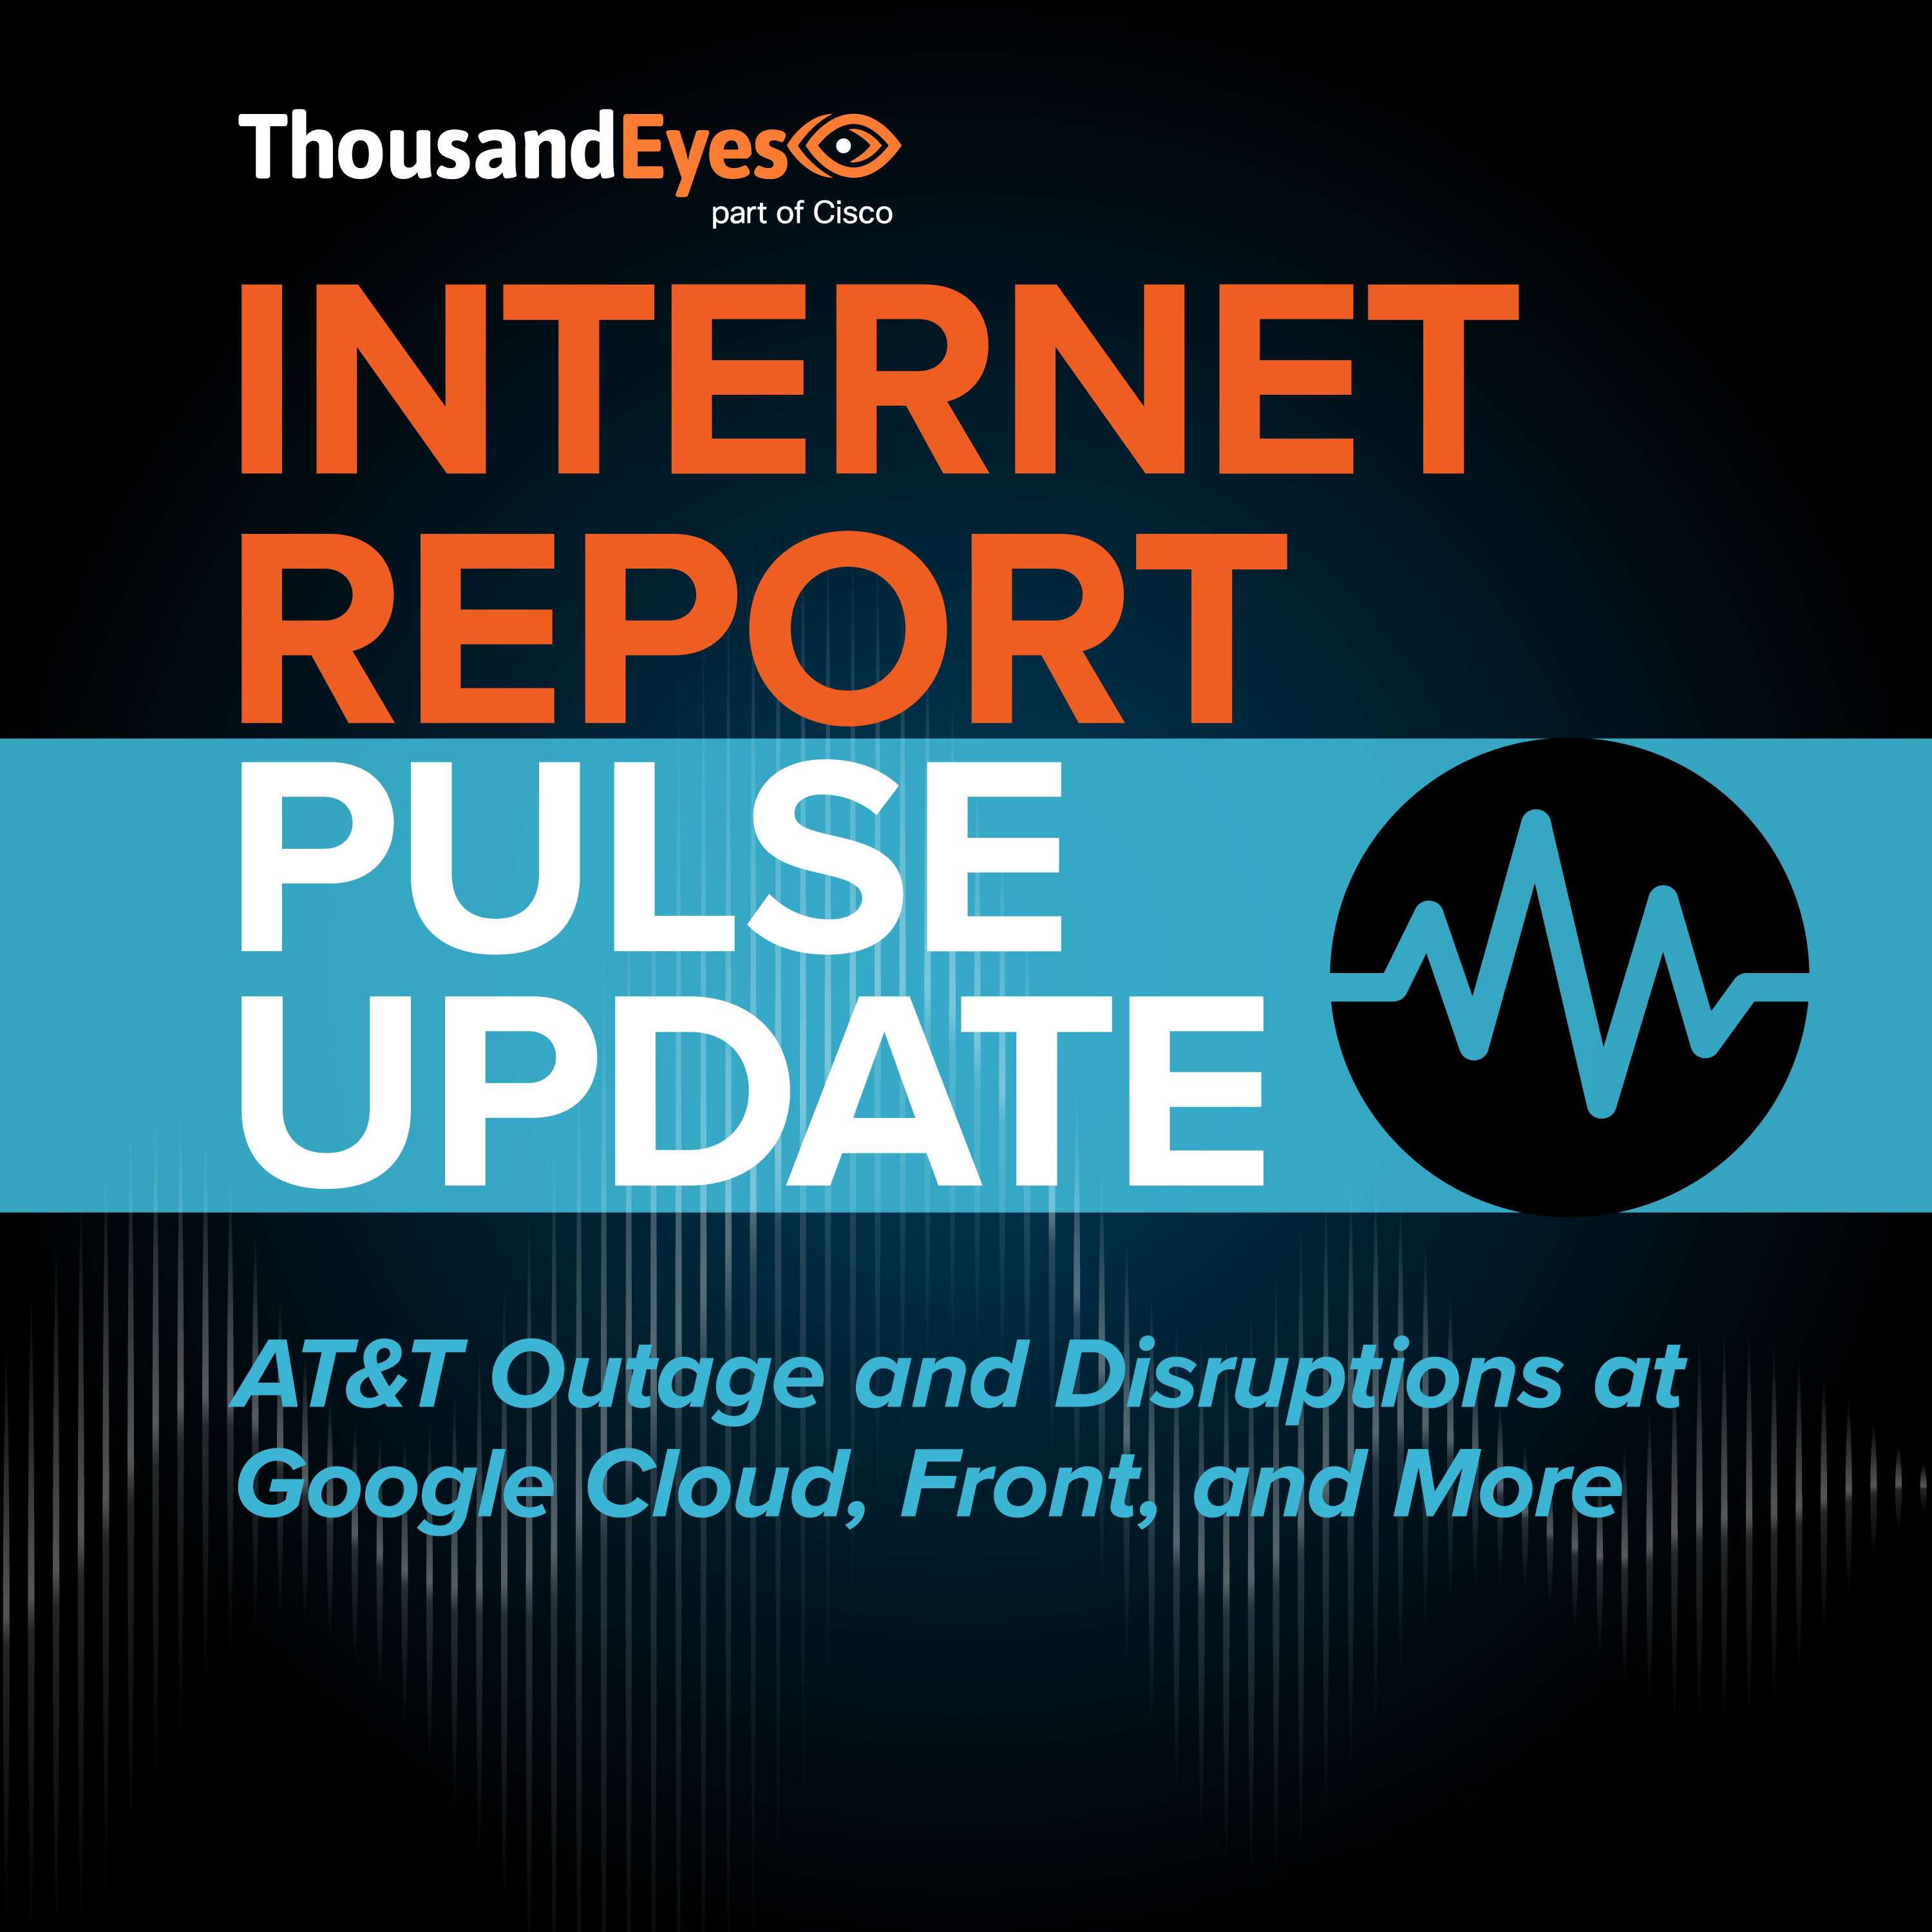 AT&T Outage and Disruptions at Google Cloud, Front, and More | Pulse Update